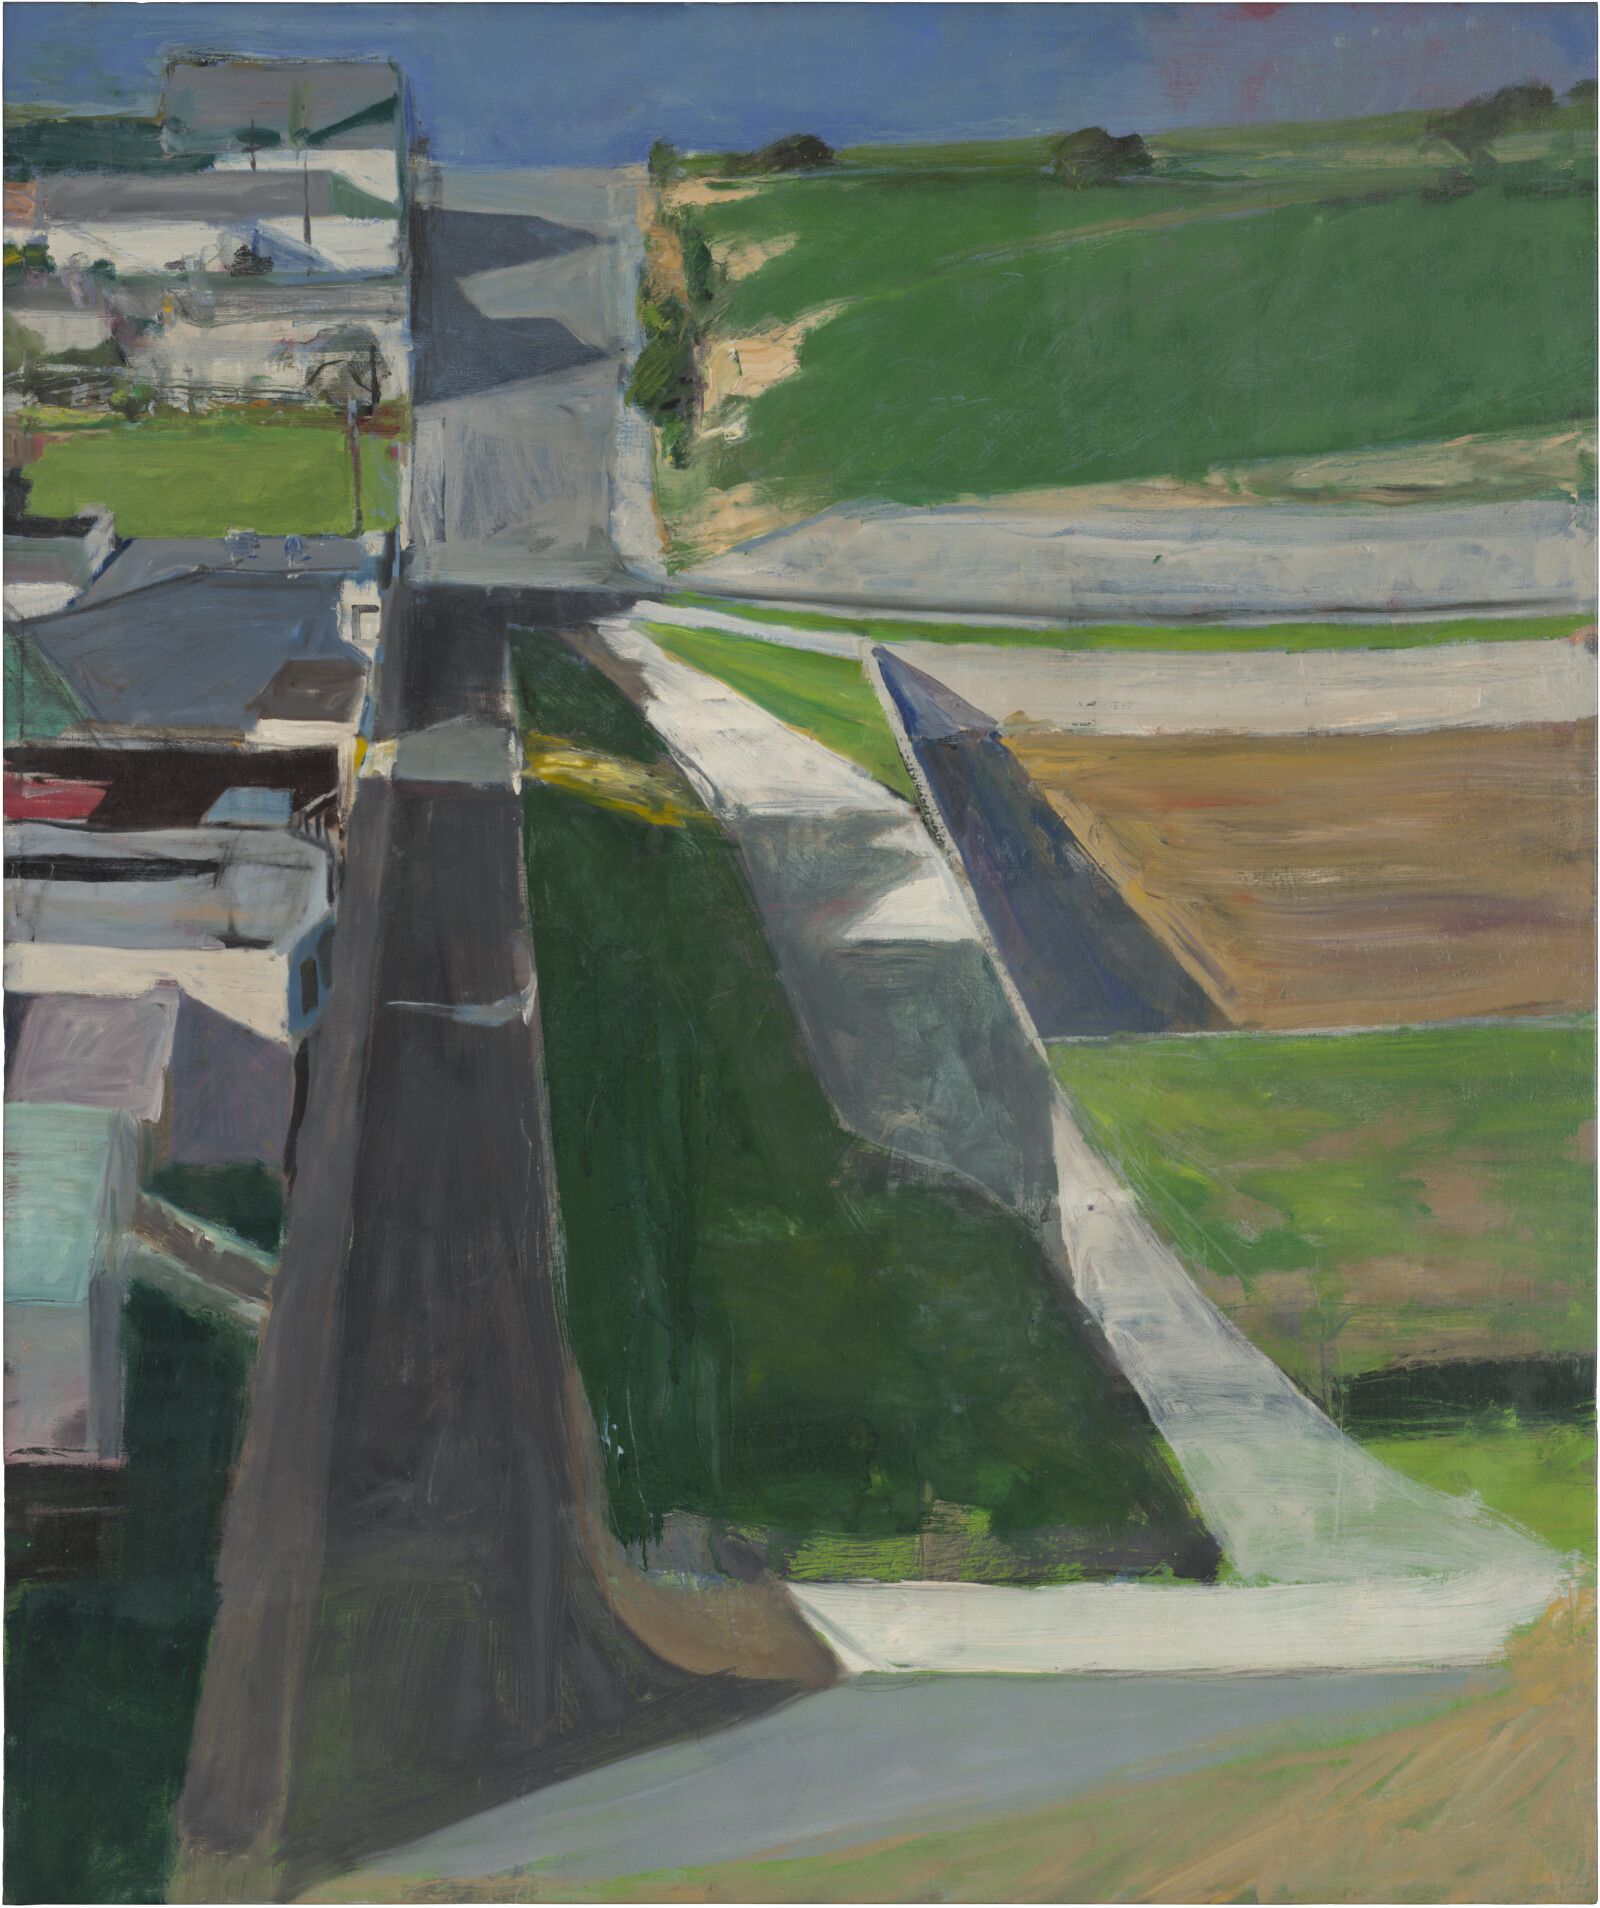 Paintings from the Permanent Collection of the San Francisco Museum of Art